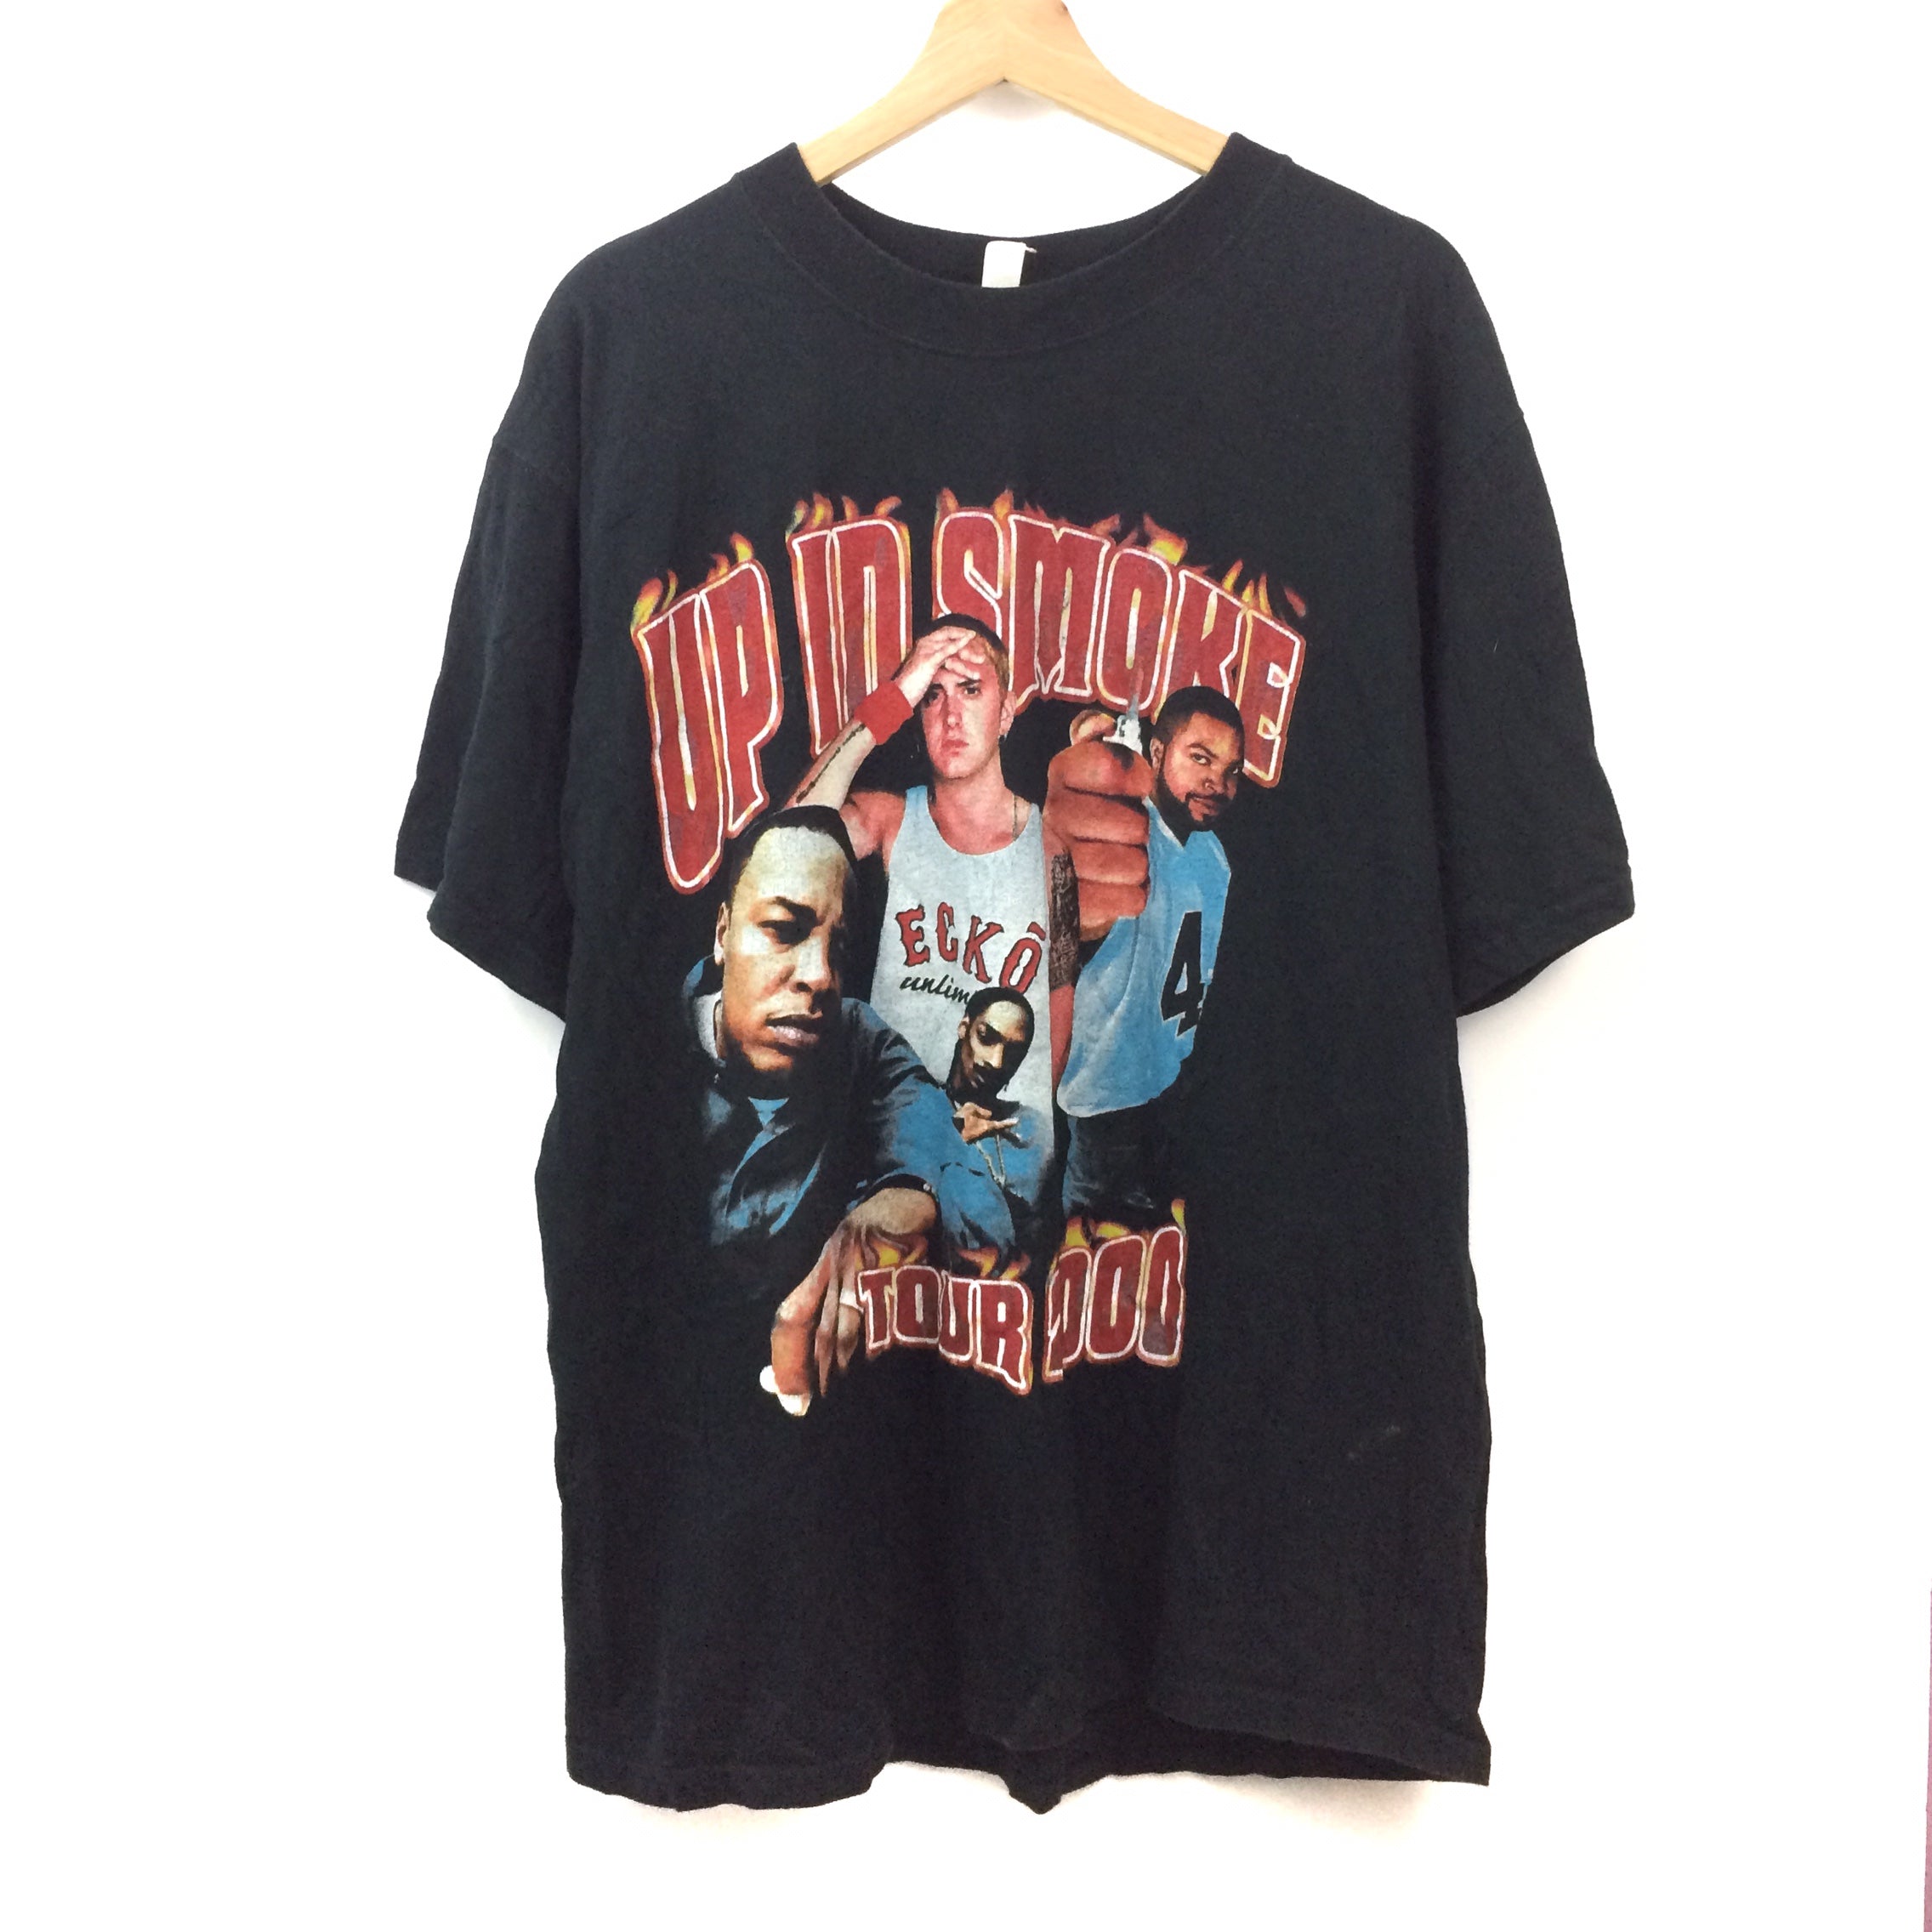 up in smoke tour tシャツ